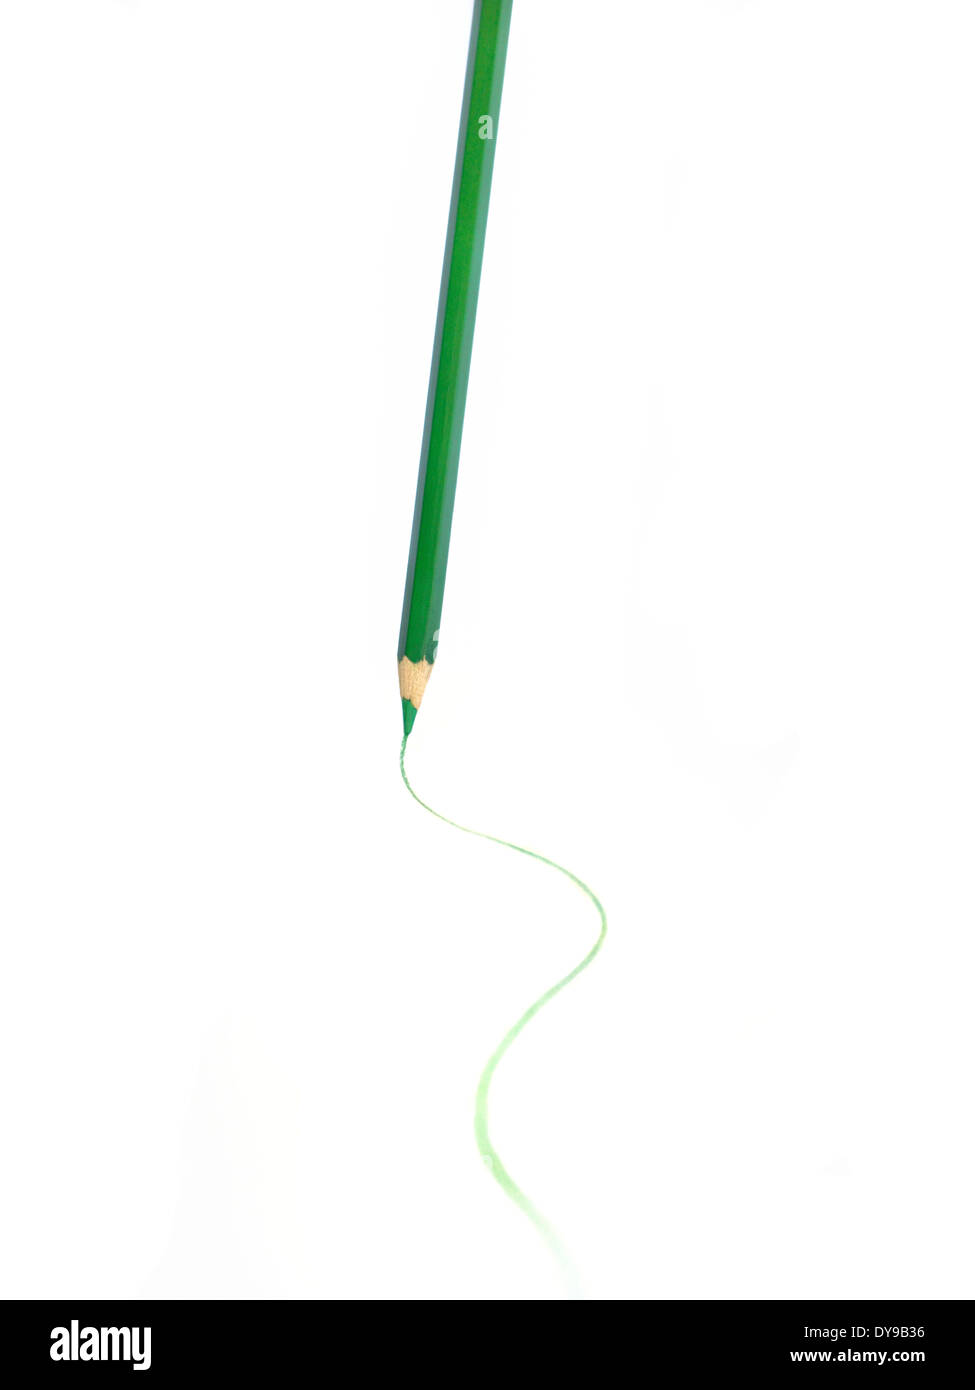 Green pencil marking a paper on white background. Stock Photo